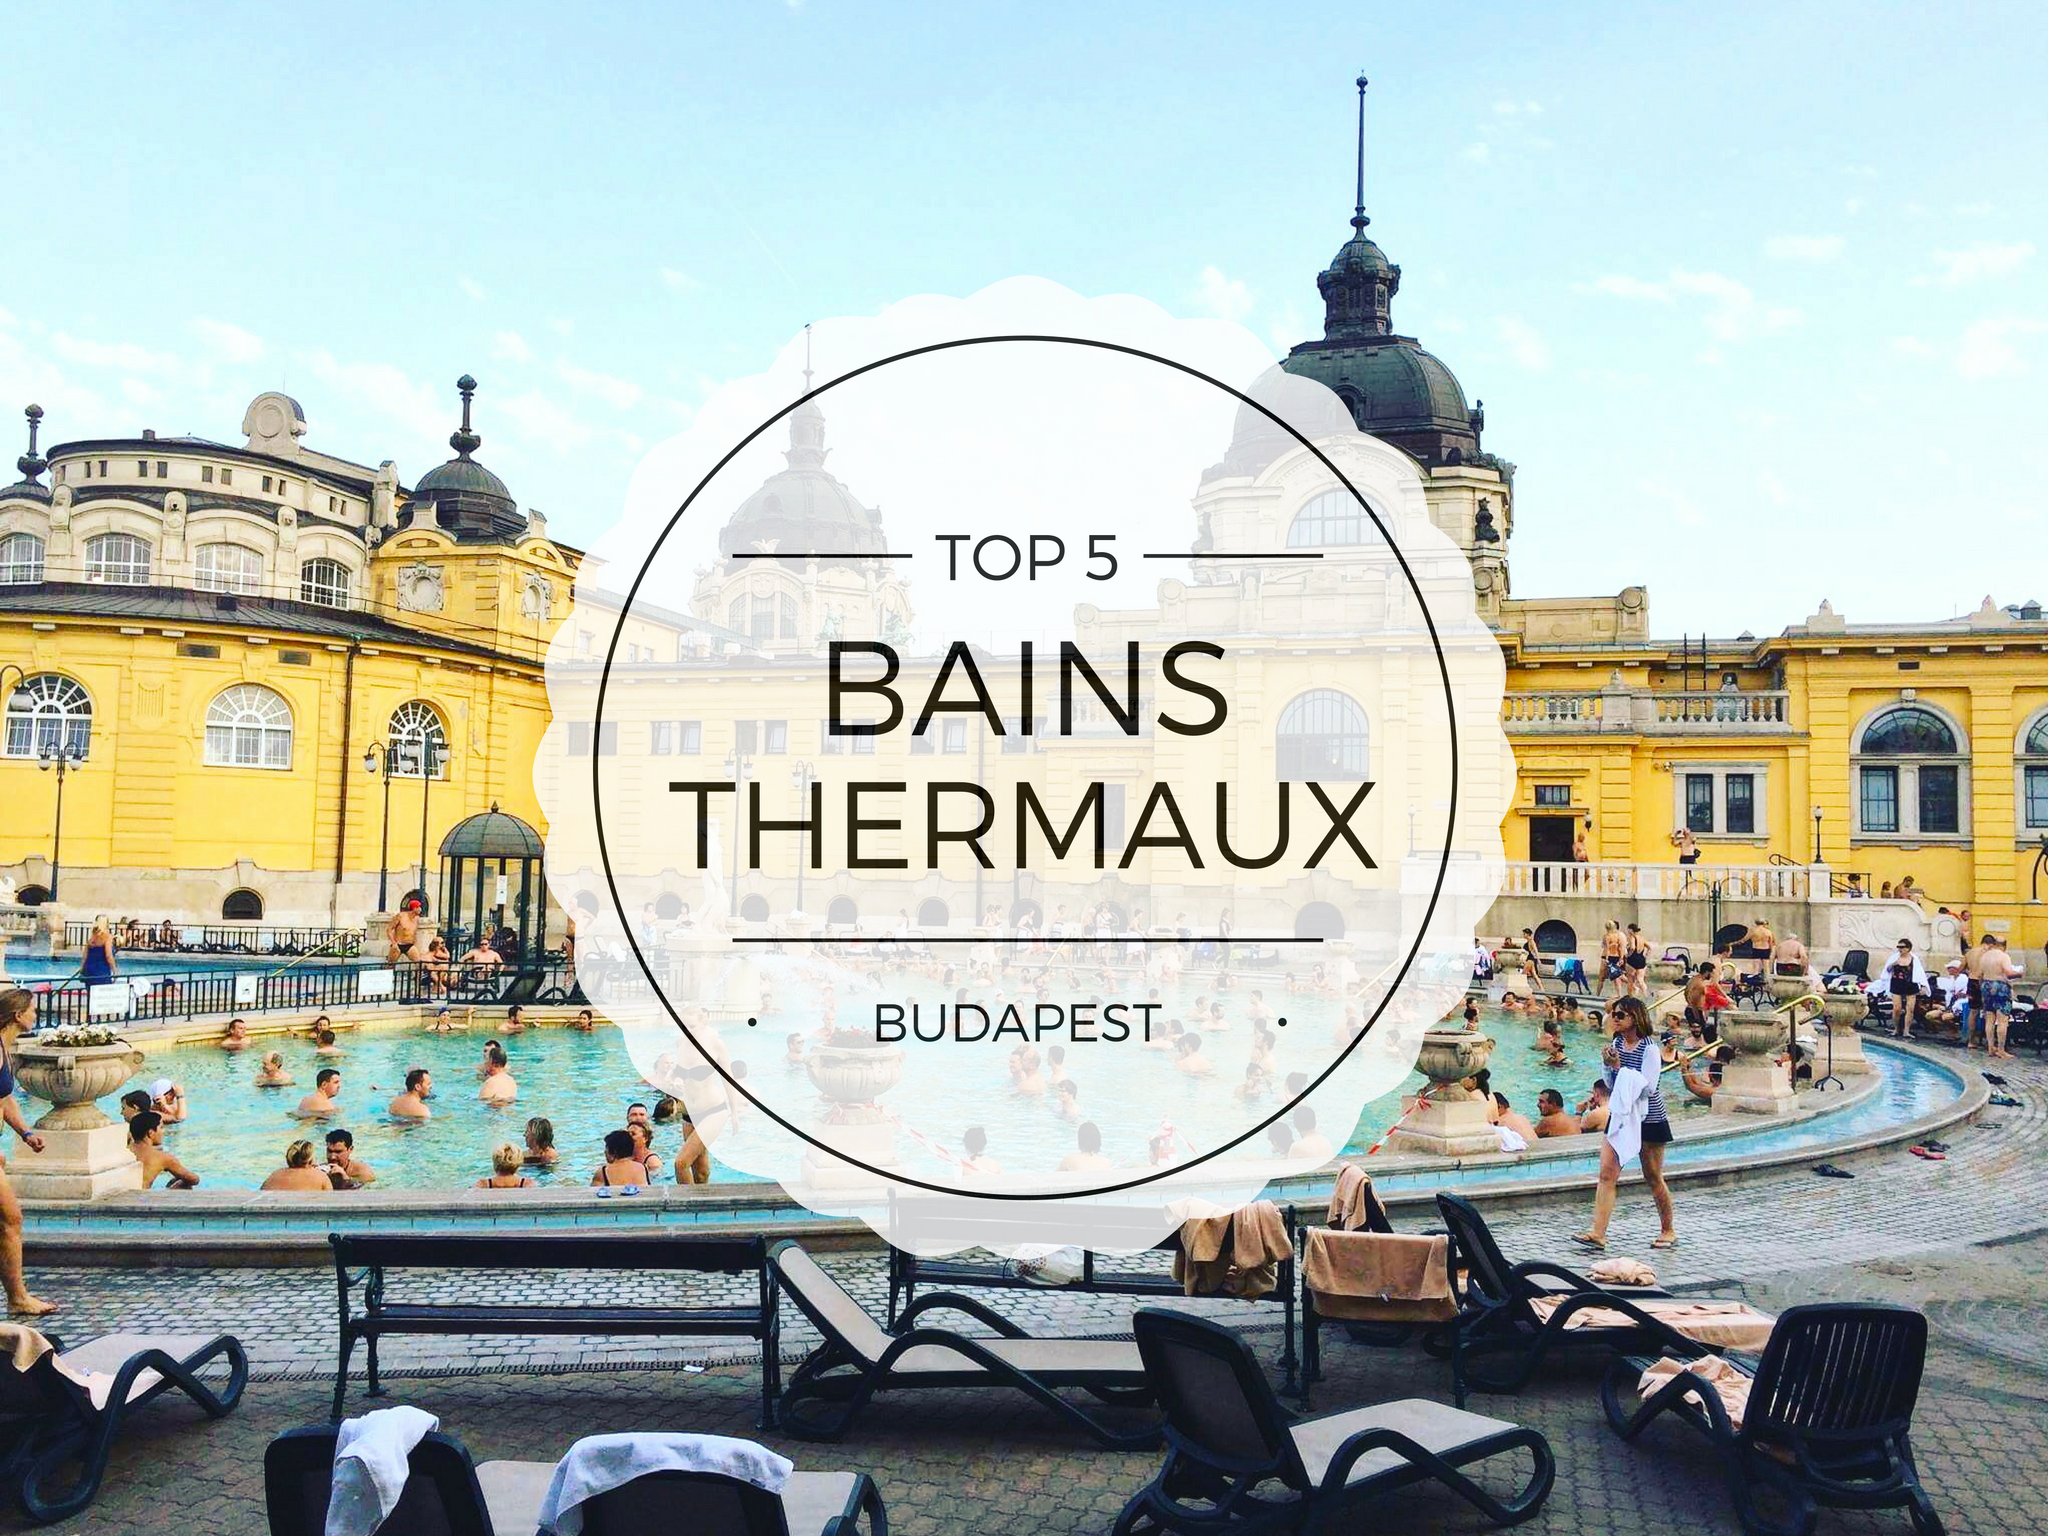 Top 5 des bains thermaux Budapest Hongrie